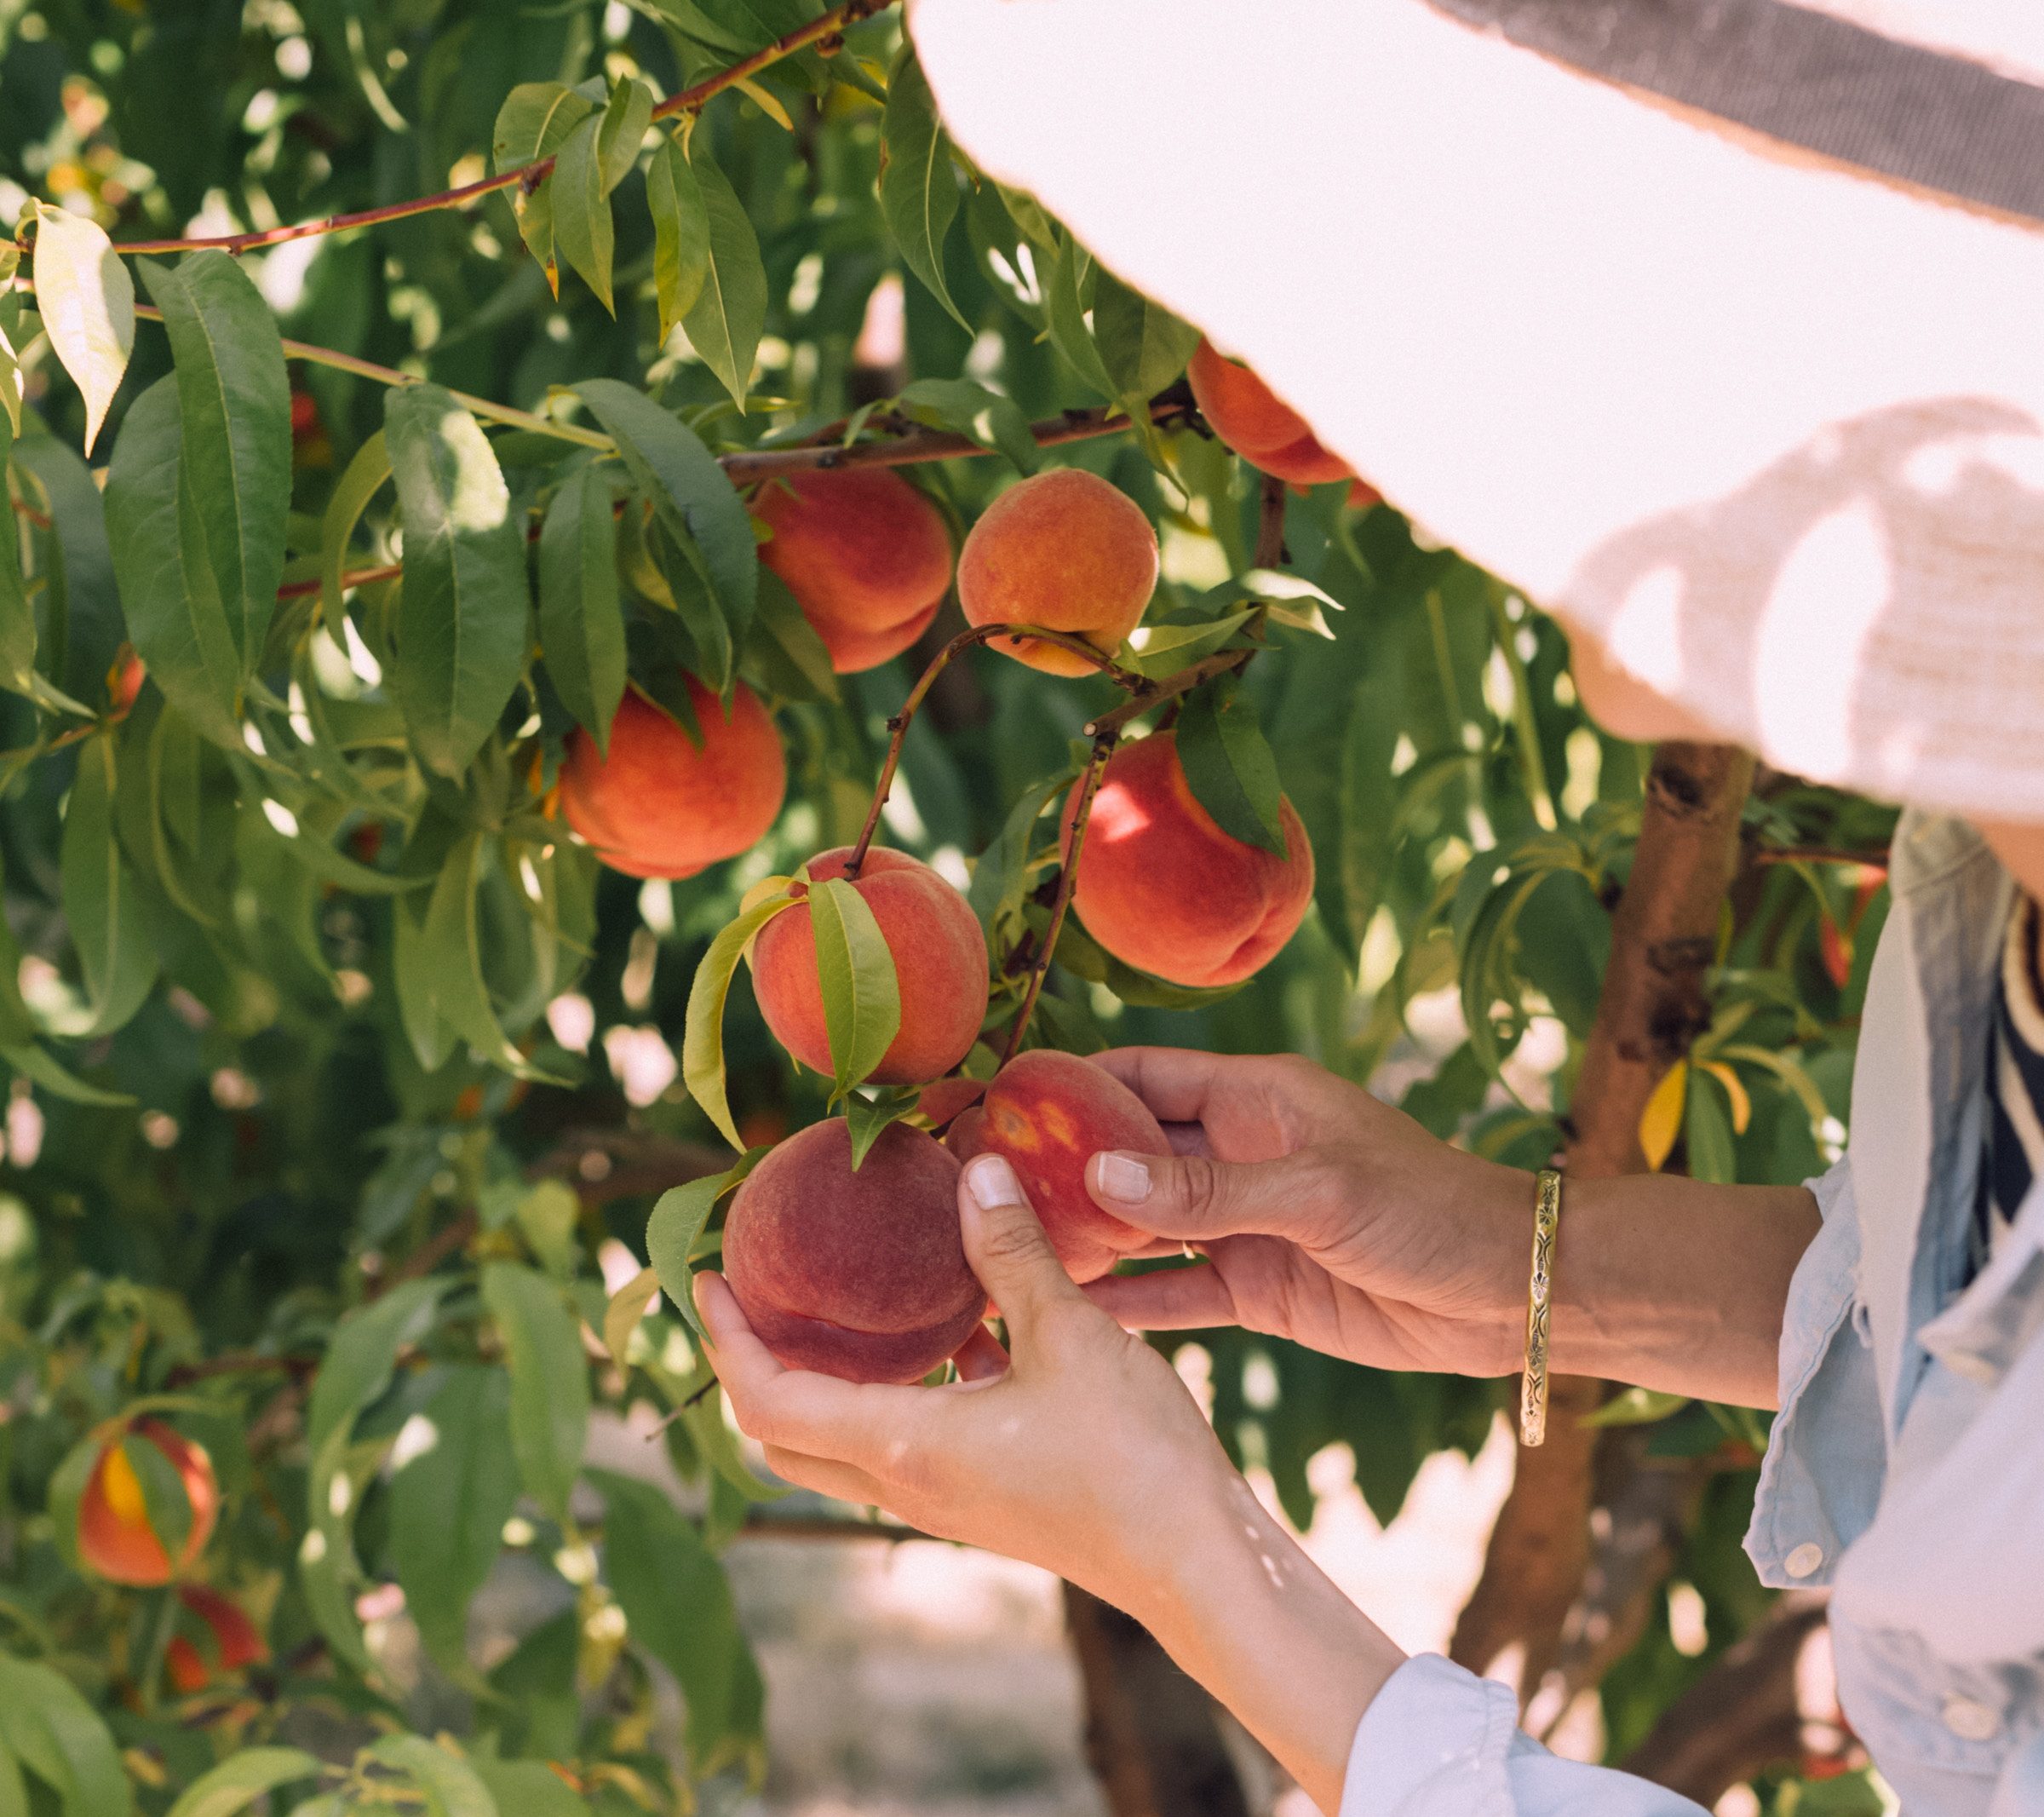 9 Health Benefits of Peaches You'll Be Glad to Know